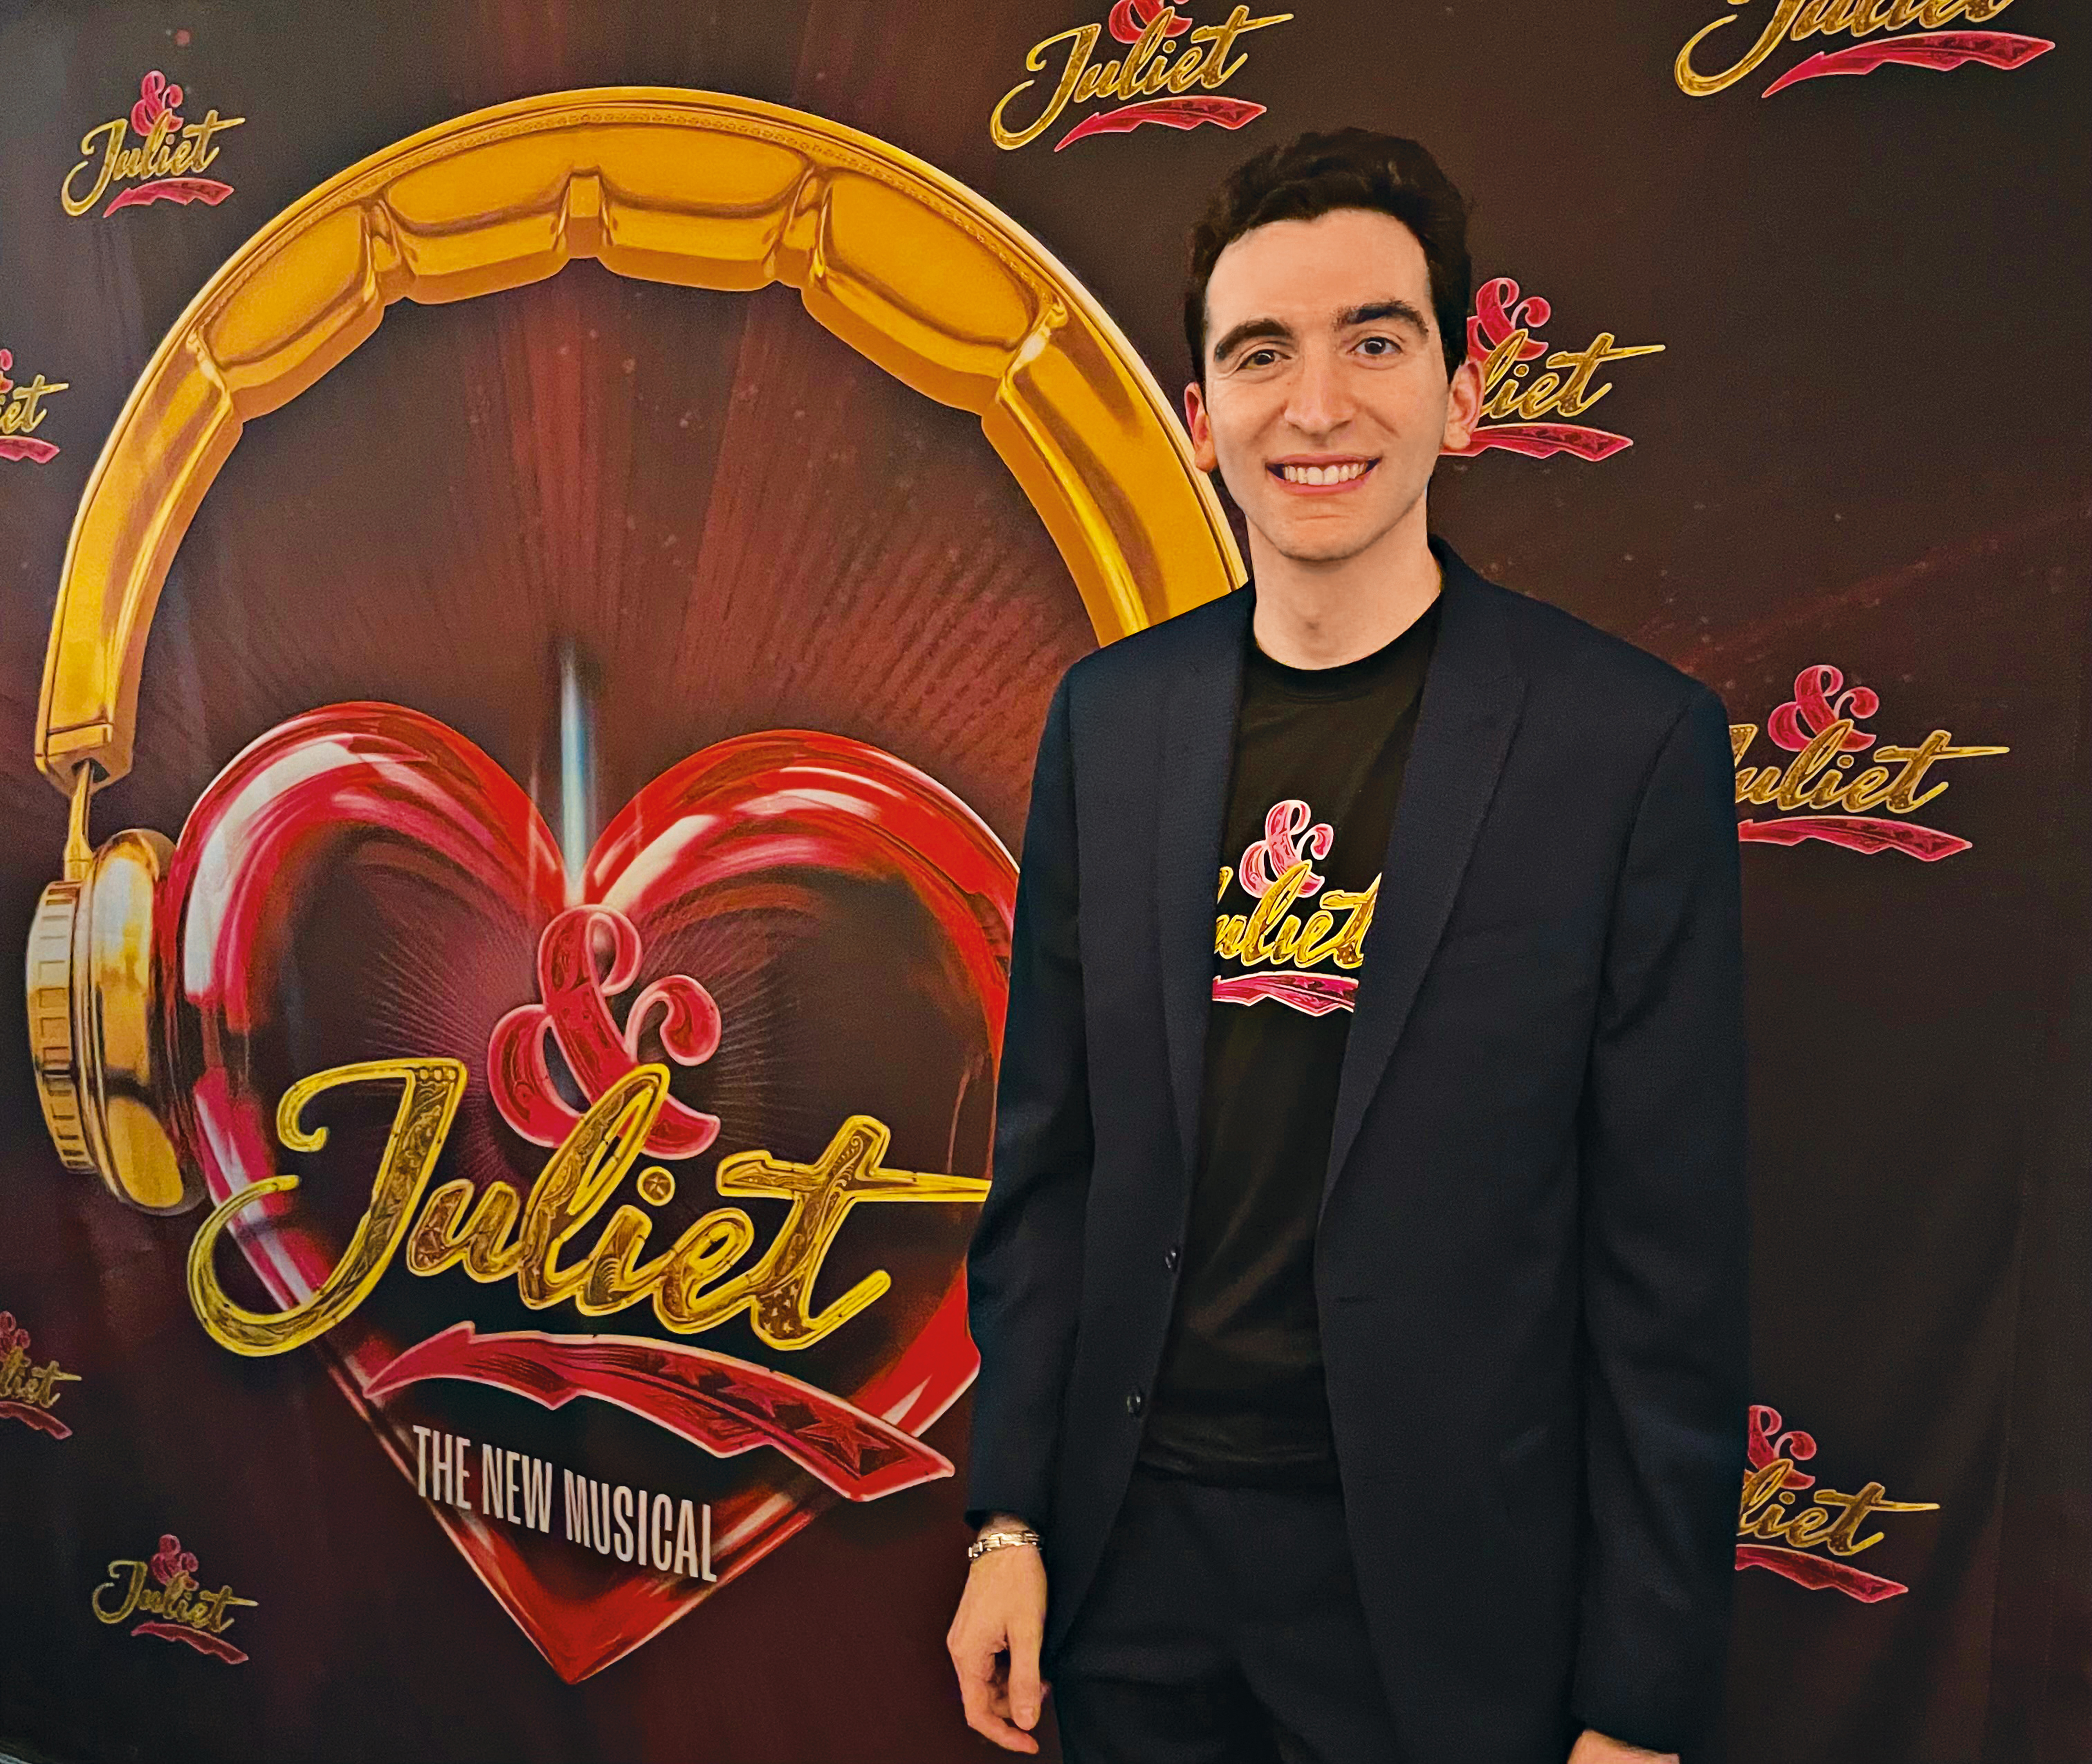 A person standing in front of a sign that has "Juliet, The New Musical" on it